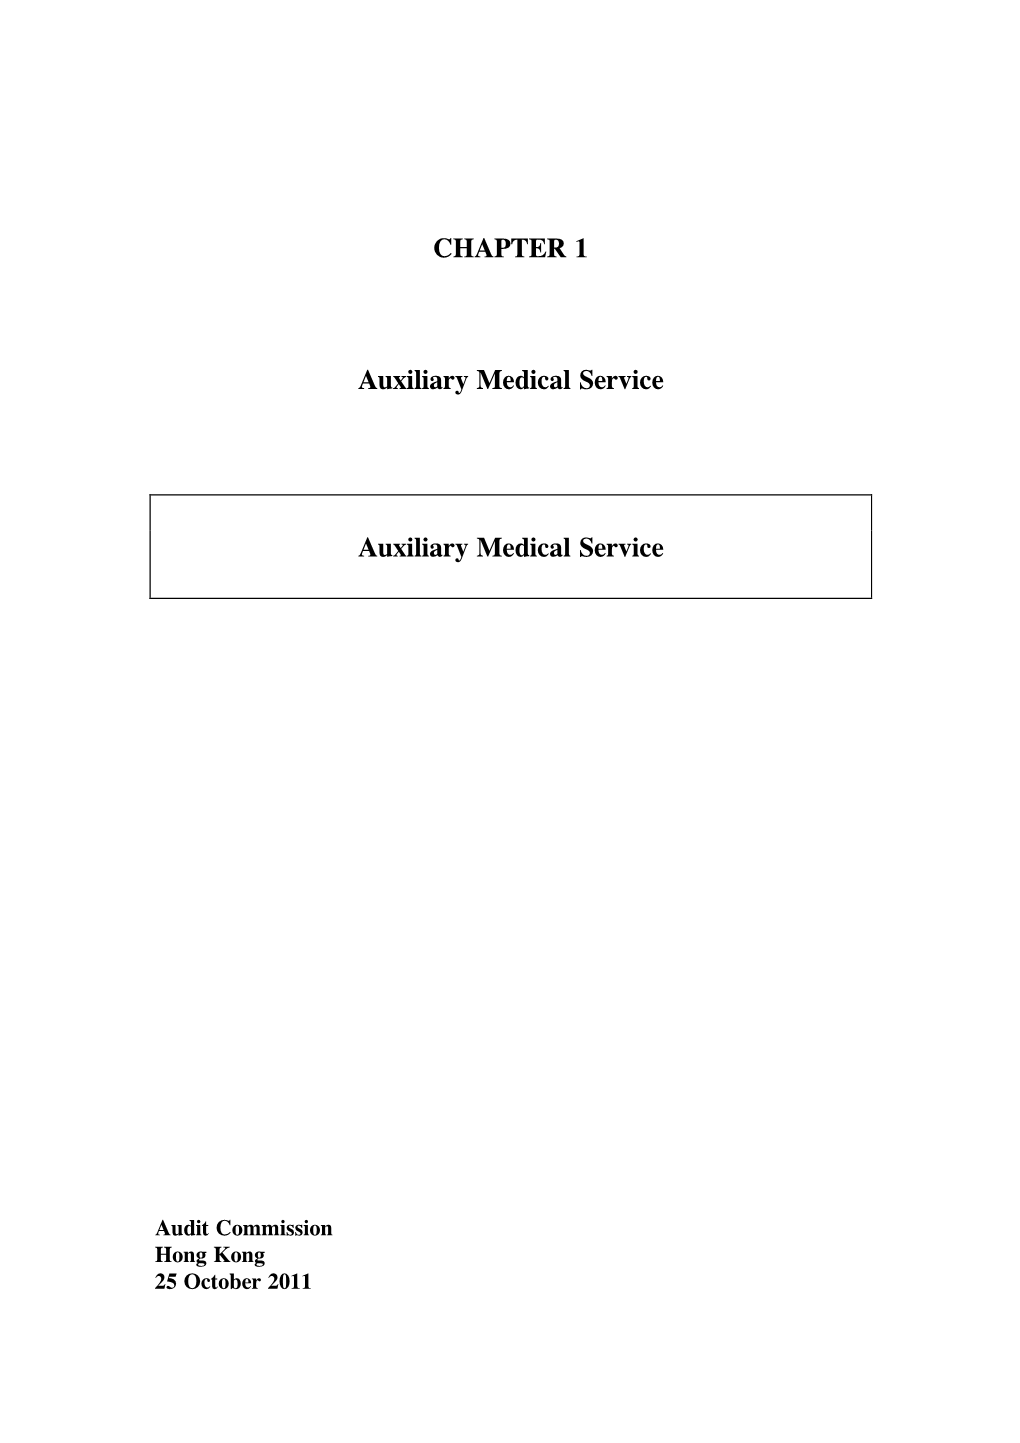 AUXILIARY MEDICAL SERVICE Contents